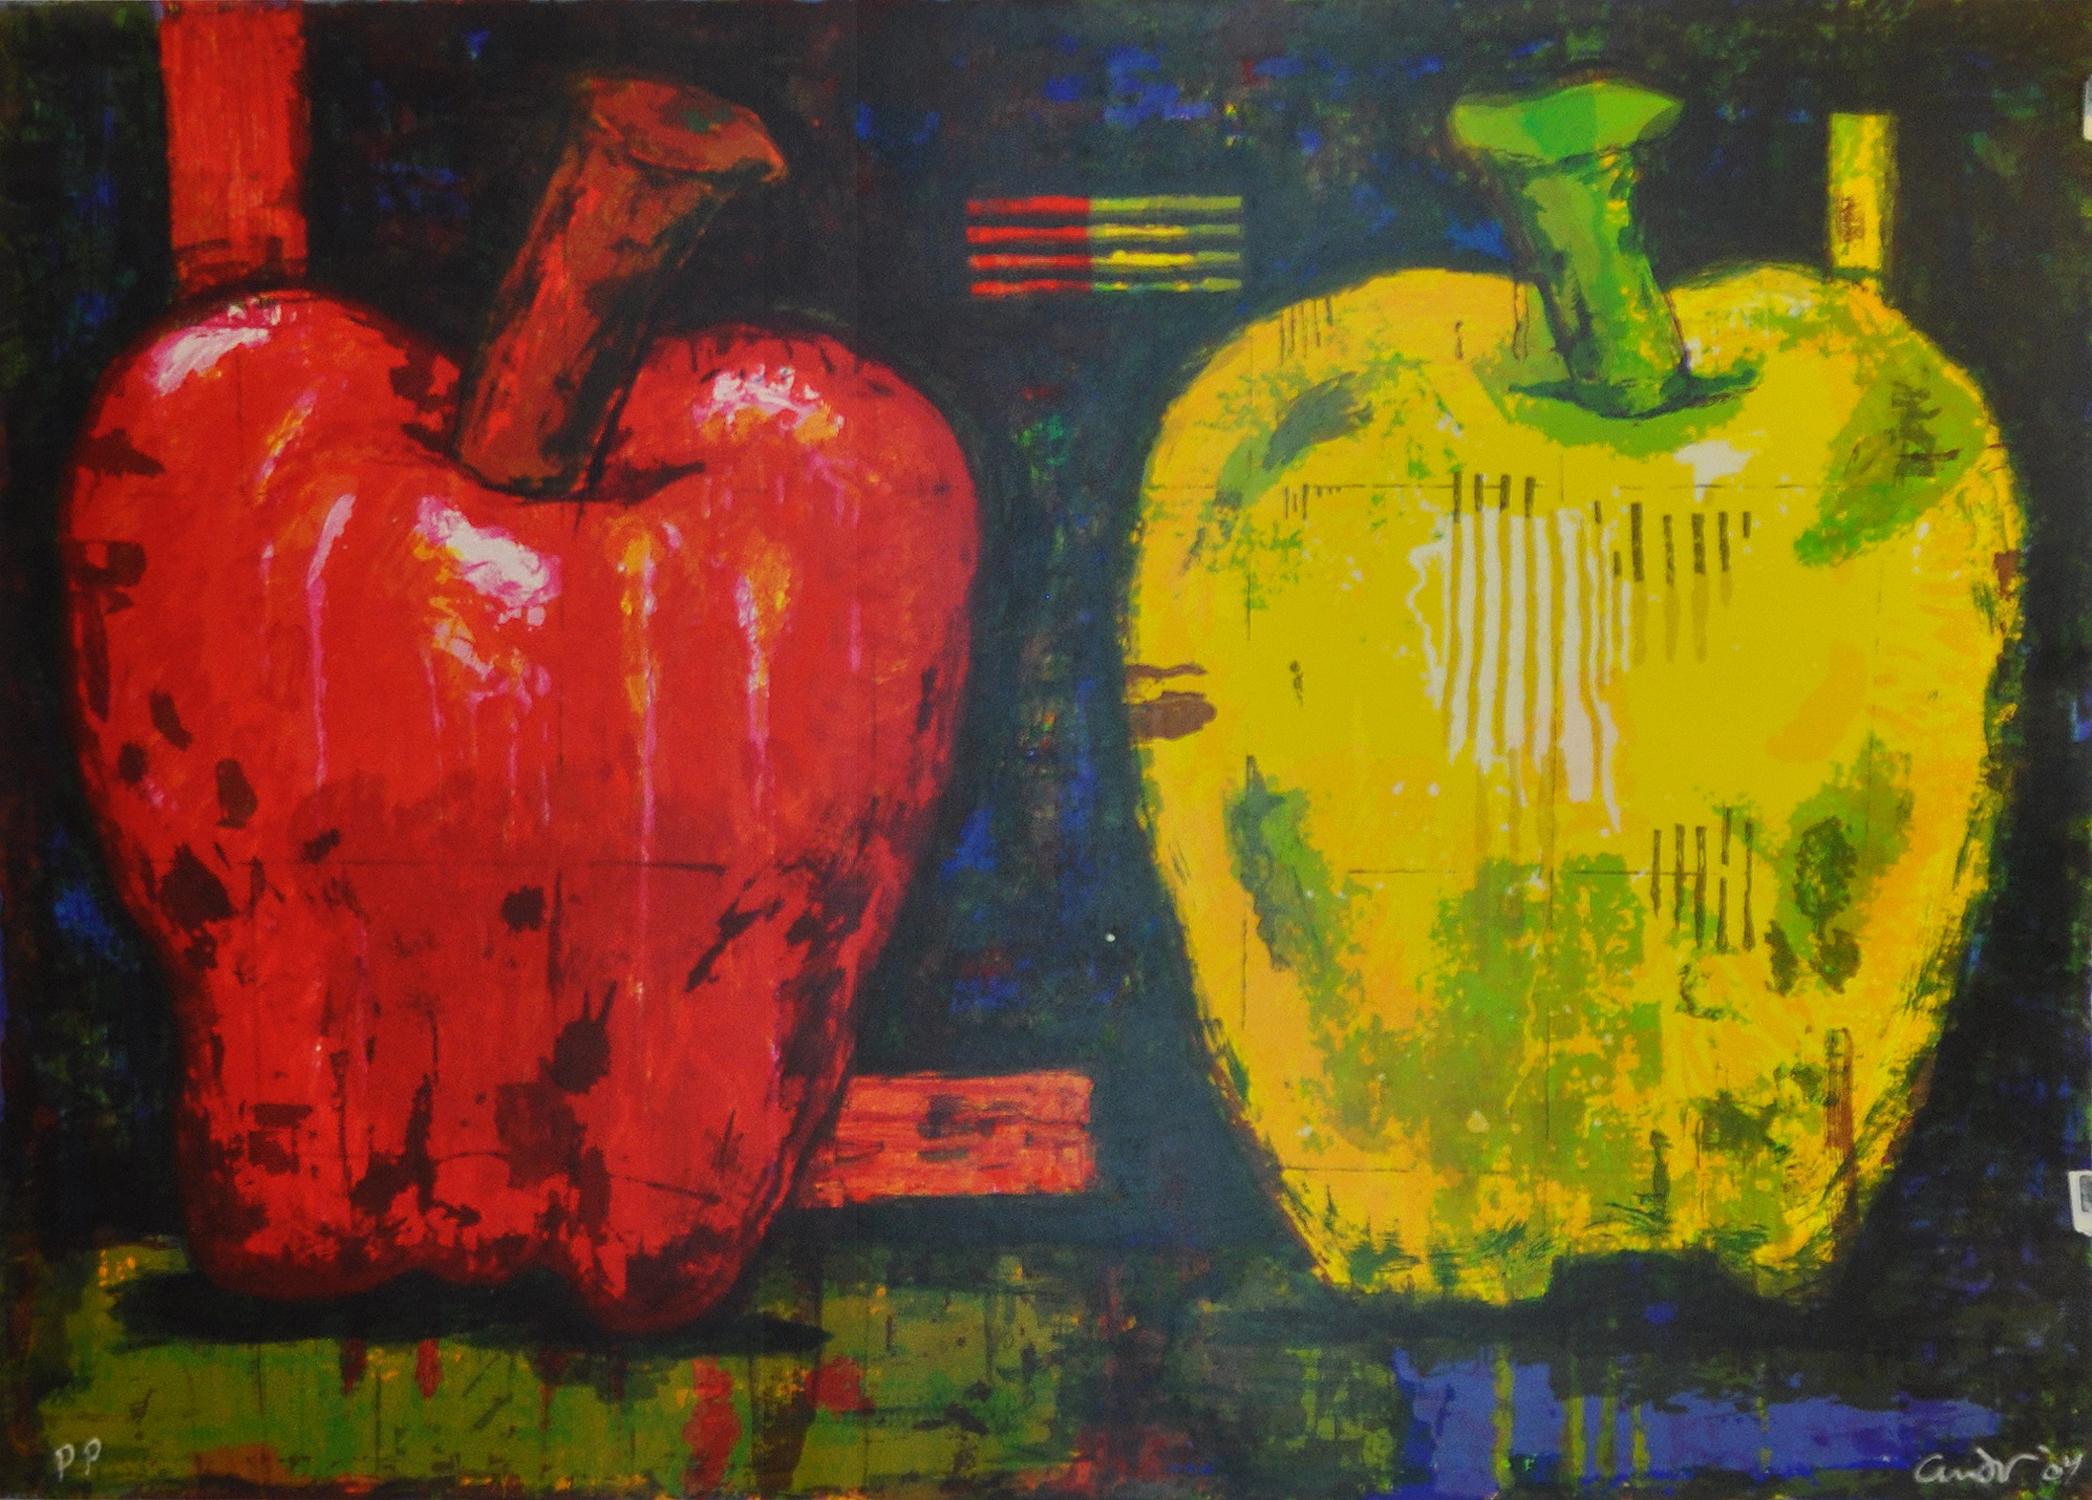 Aaron Fink (American, b. 1955) 
Two Apples. Signed, unframed
Size 140 W x 100 H
Printers Proff., Publisher Jørgen Hansen, Denmark
Unknown editions size.

Aaron Fink, born in Boston, is working in a variety of mediums including oil, prints, sculpture